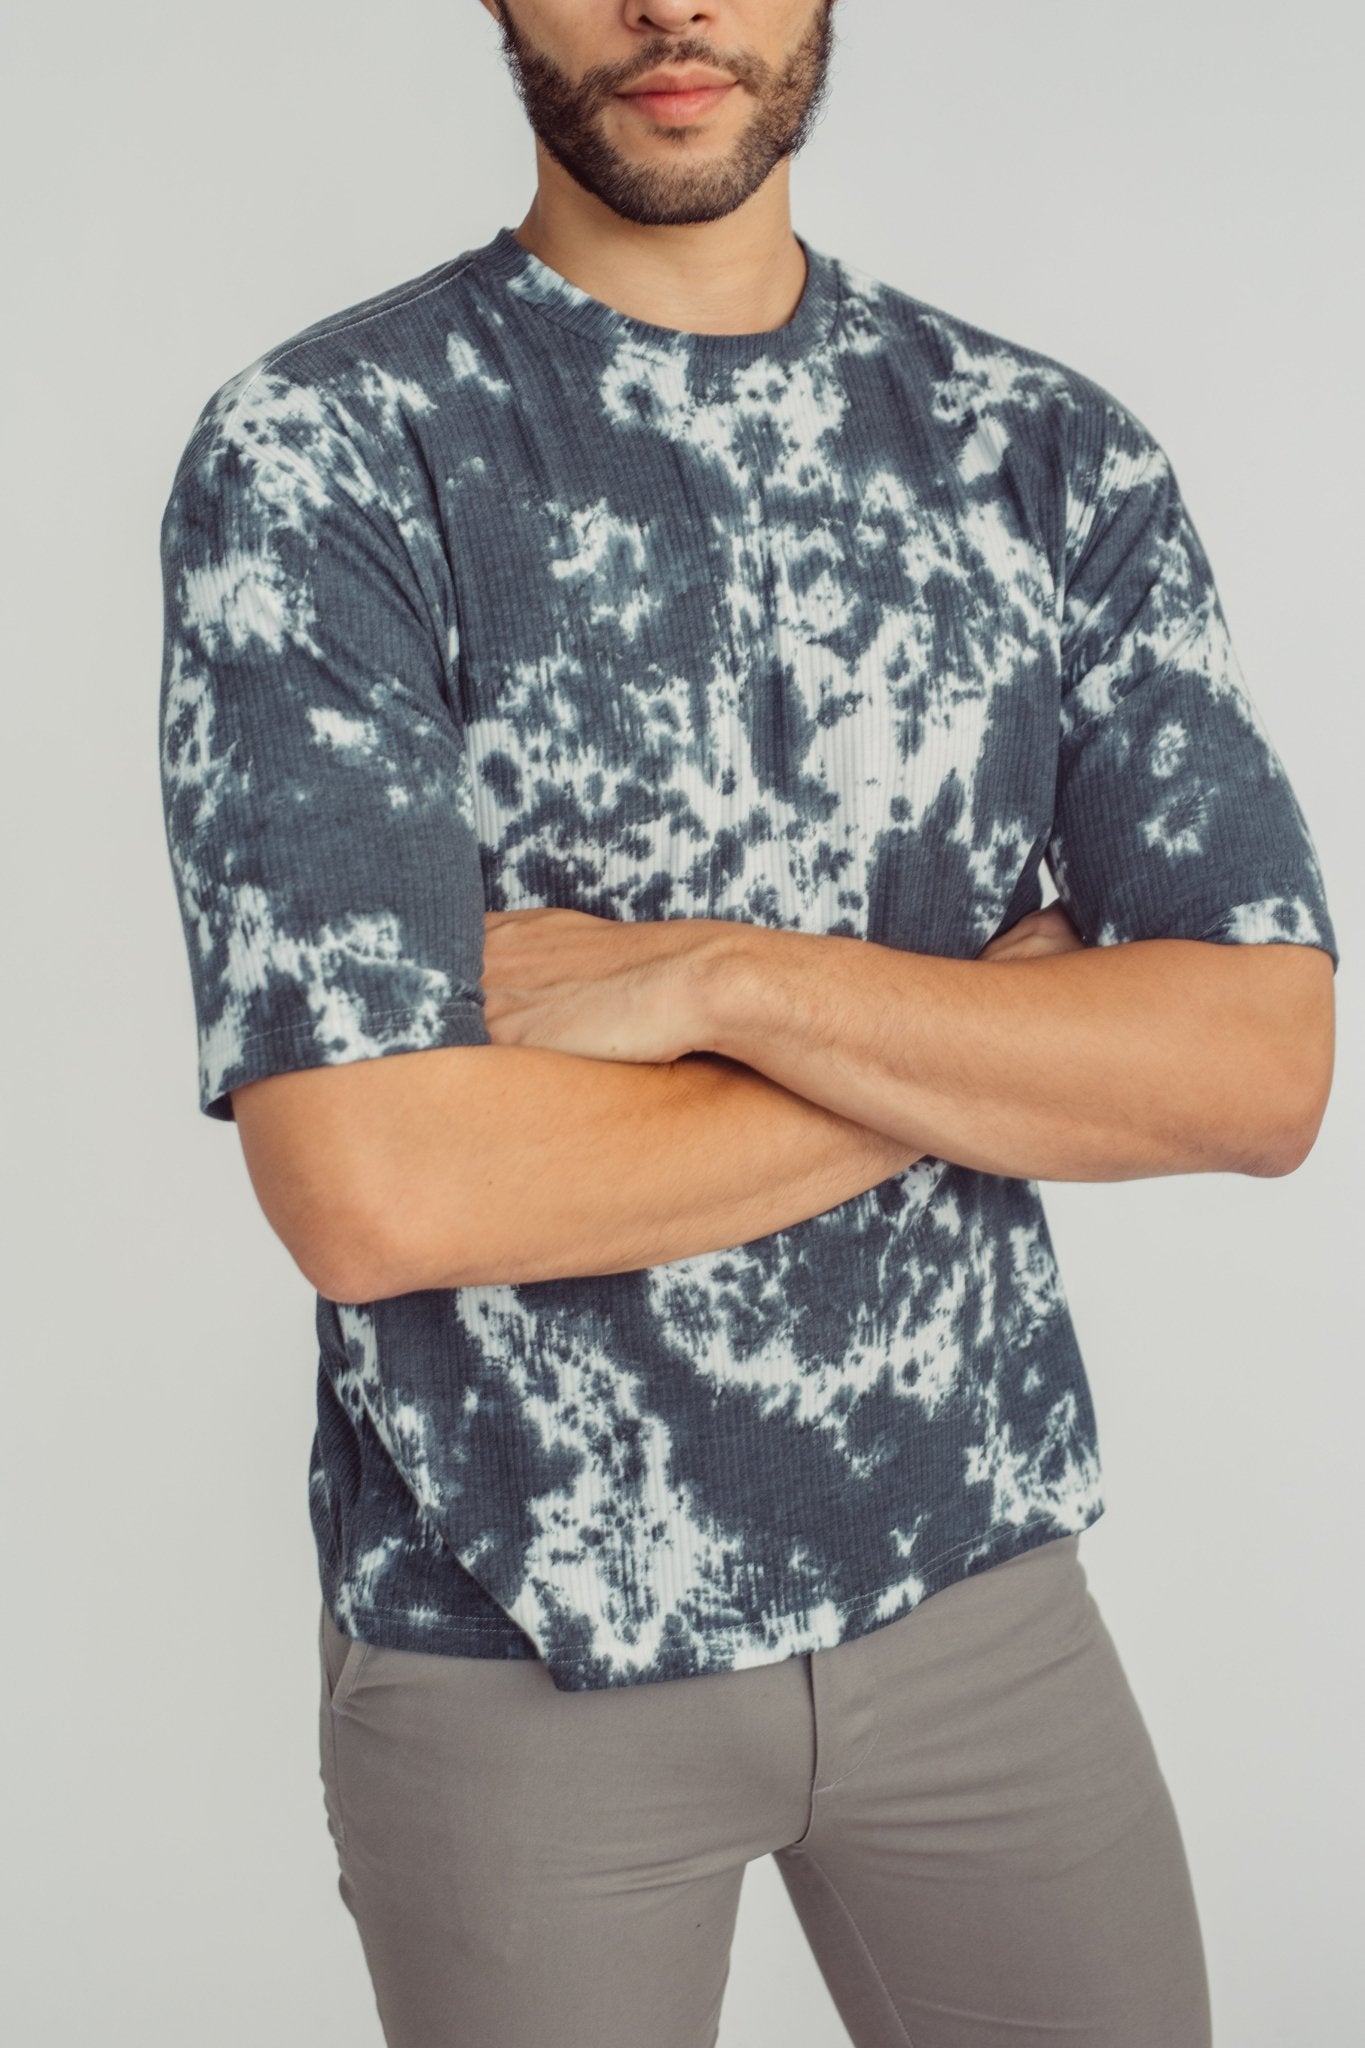 Round Neck Shirt with Tie Dye Urban Fit Tee - Mossimo PH